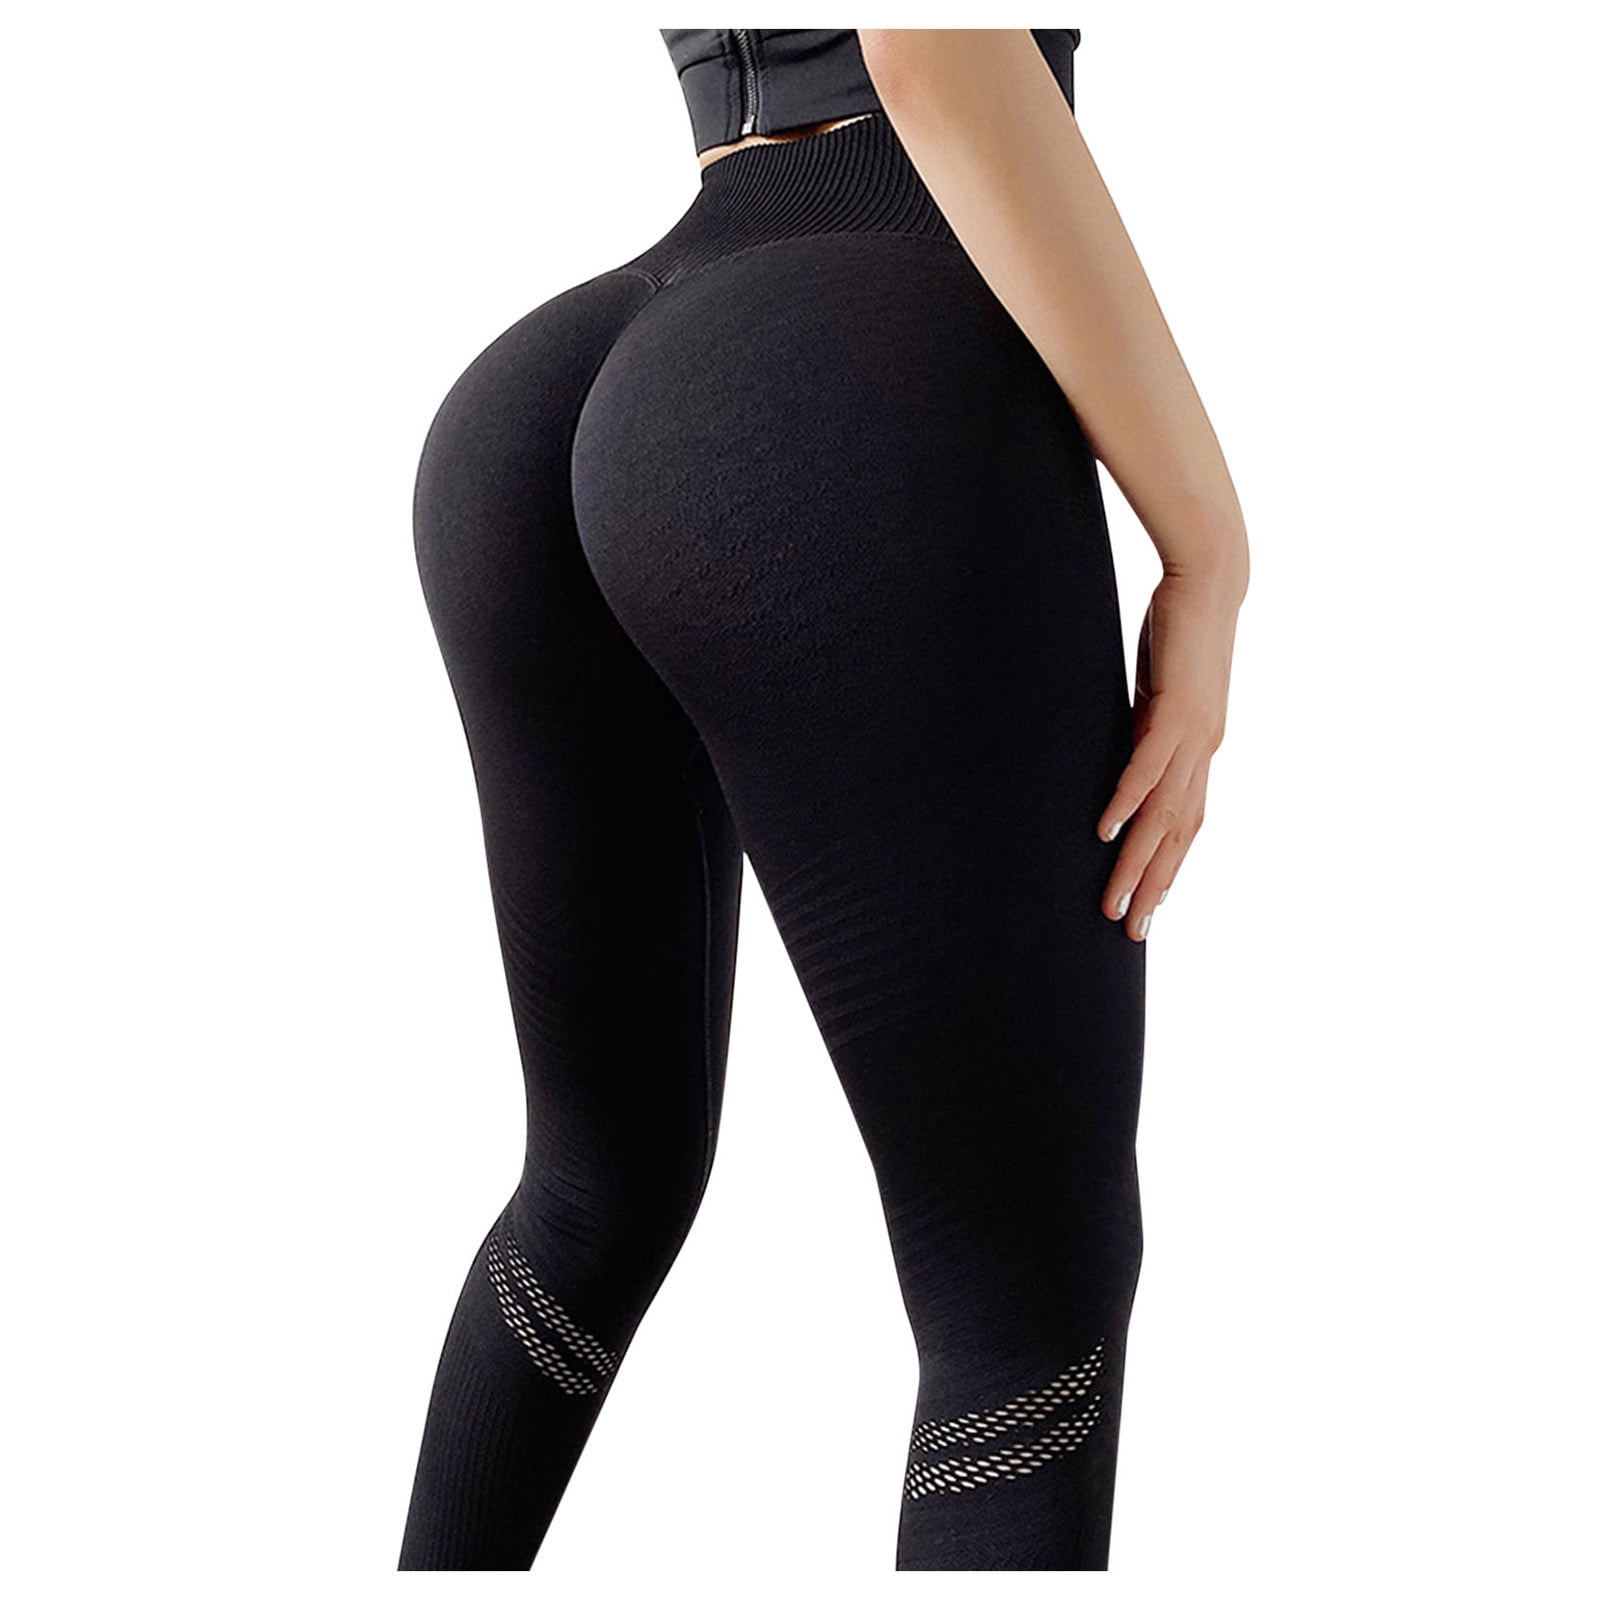 MixMatchy Women's Thick High Waist Yoga Pants Tummy Control Slimming Booty  Leggings Workout Running Butt Lift Tights Black S at  Women's  Clothing store